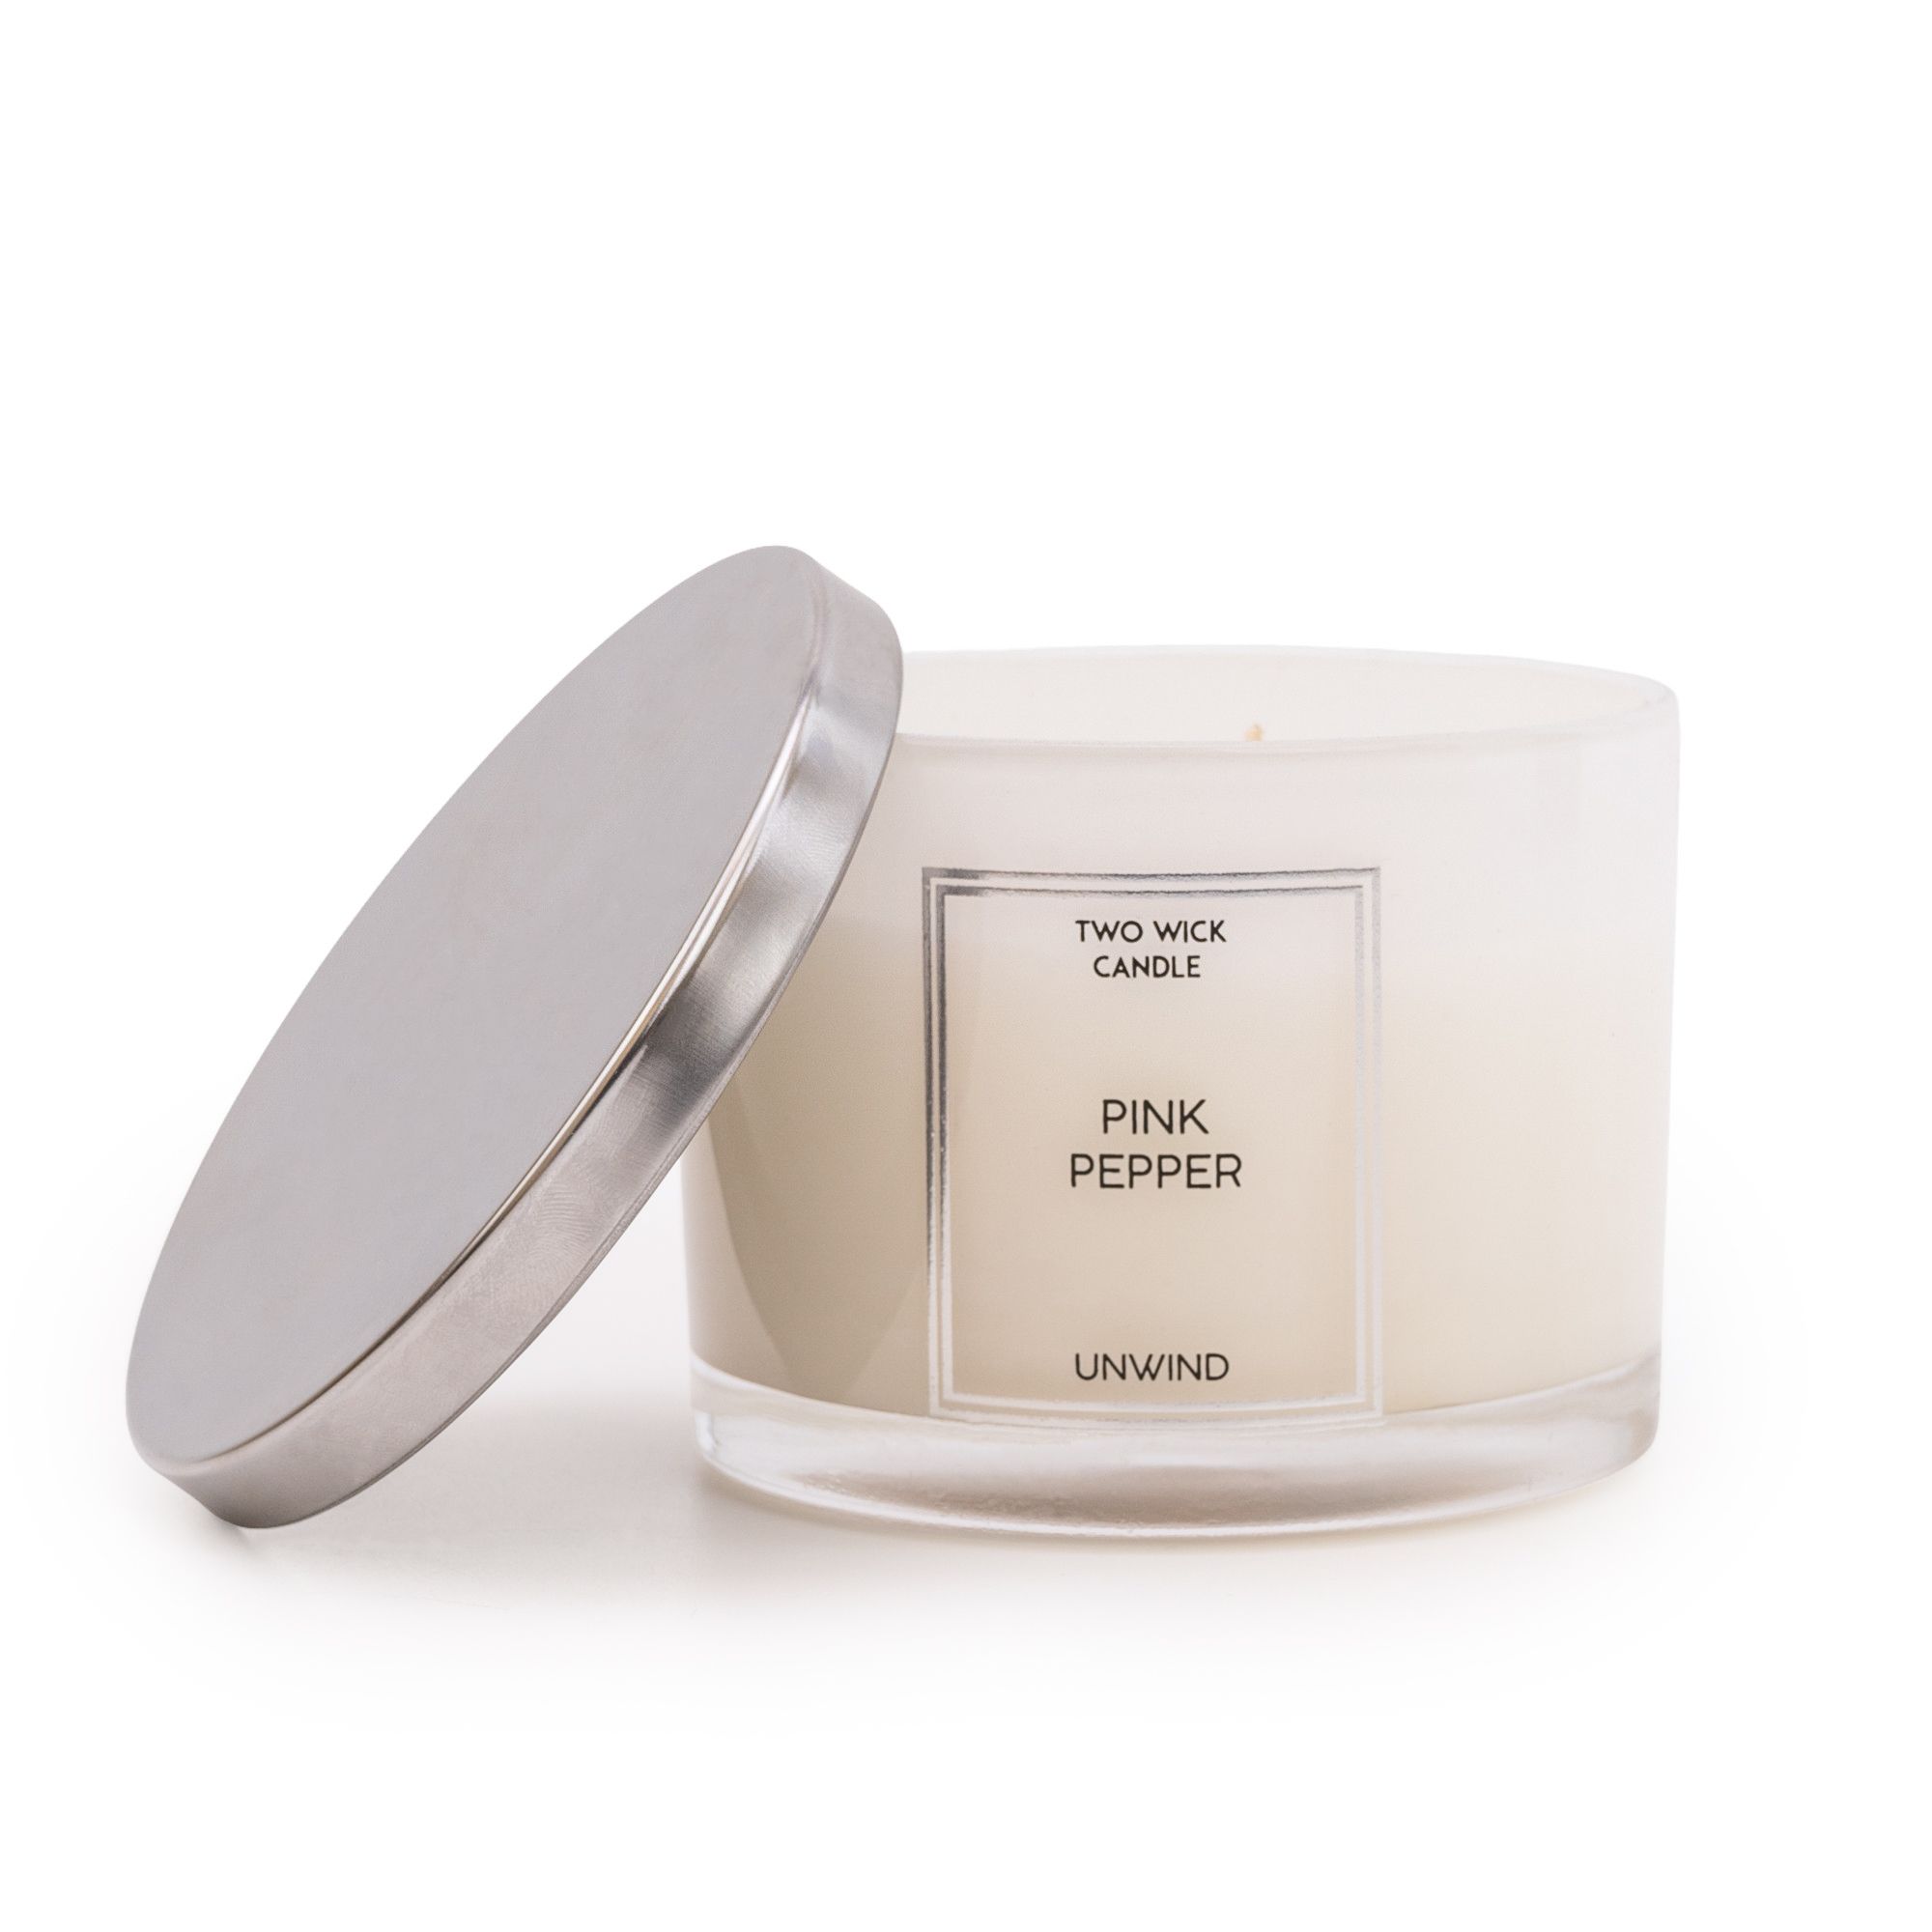 Candlelight White Pink pepper Scented candle 0.64g, Large